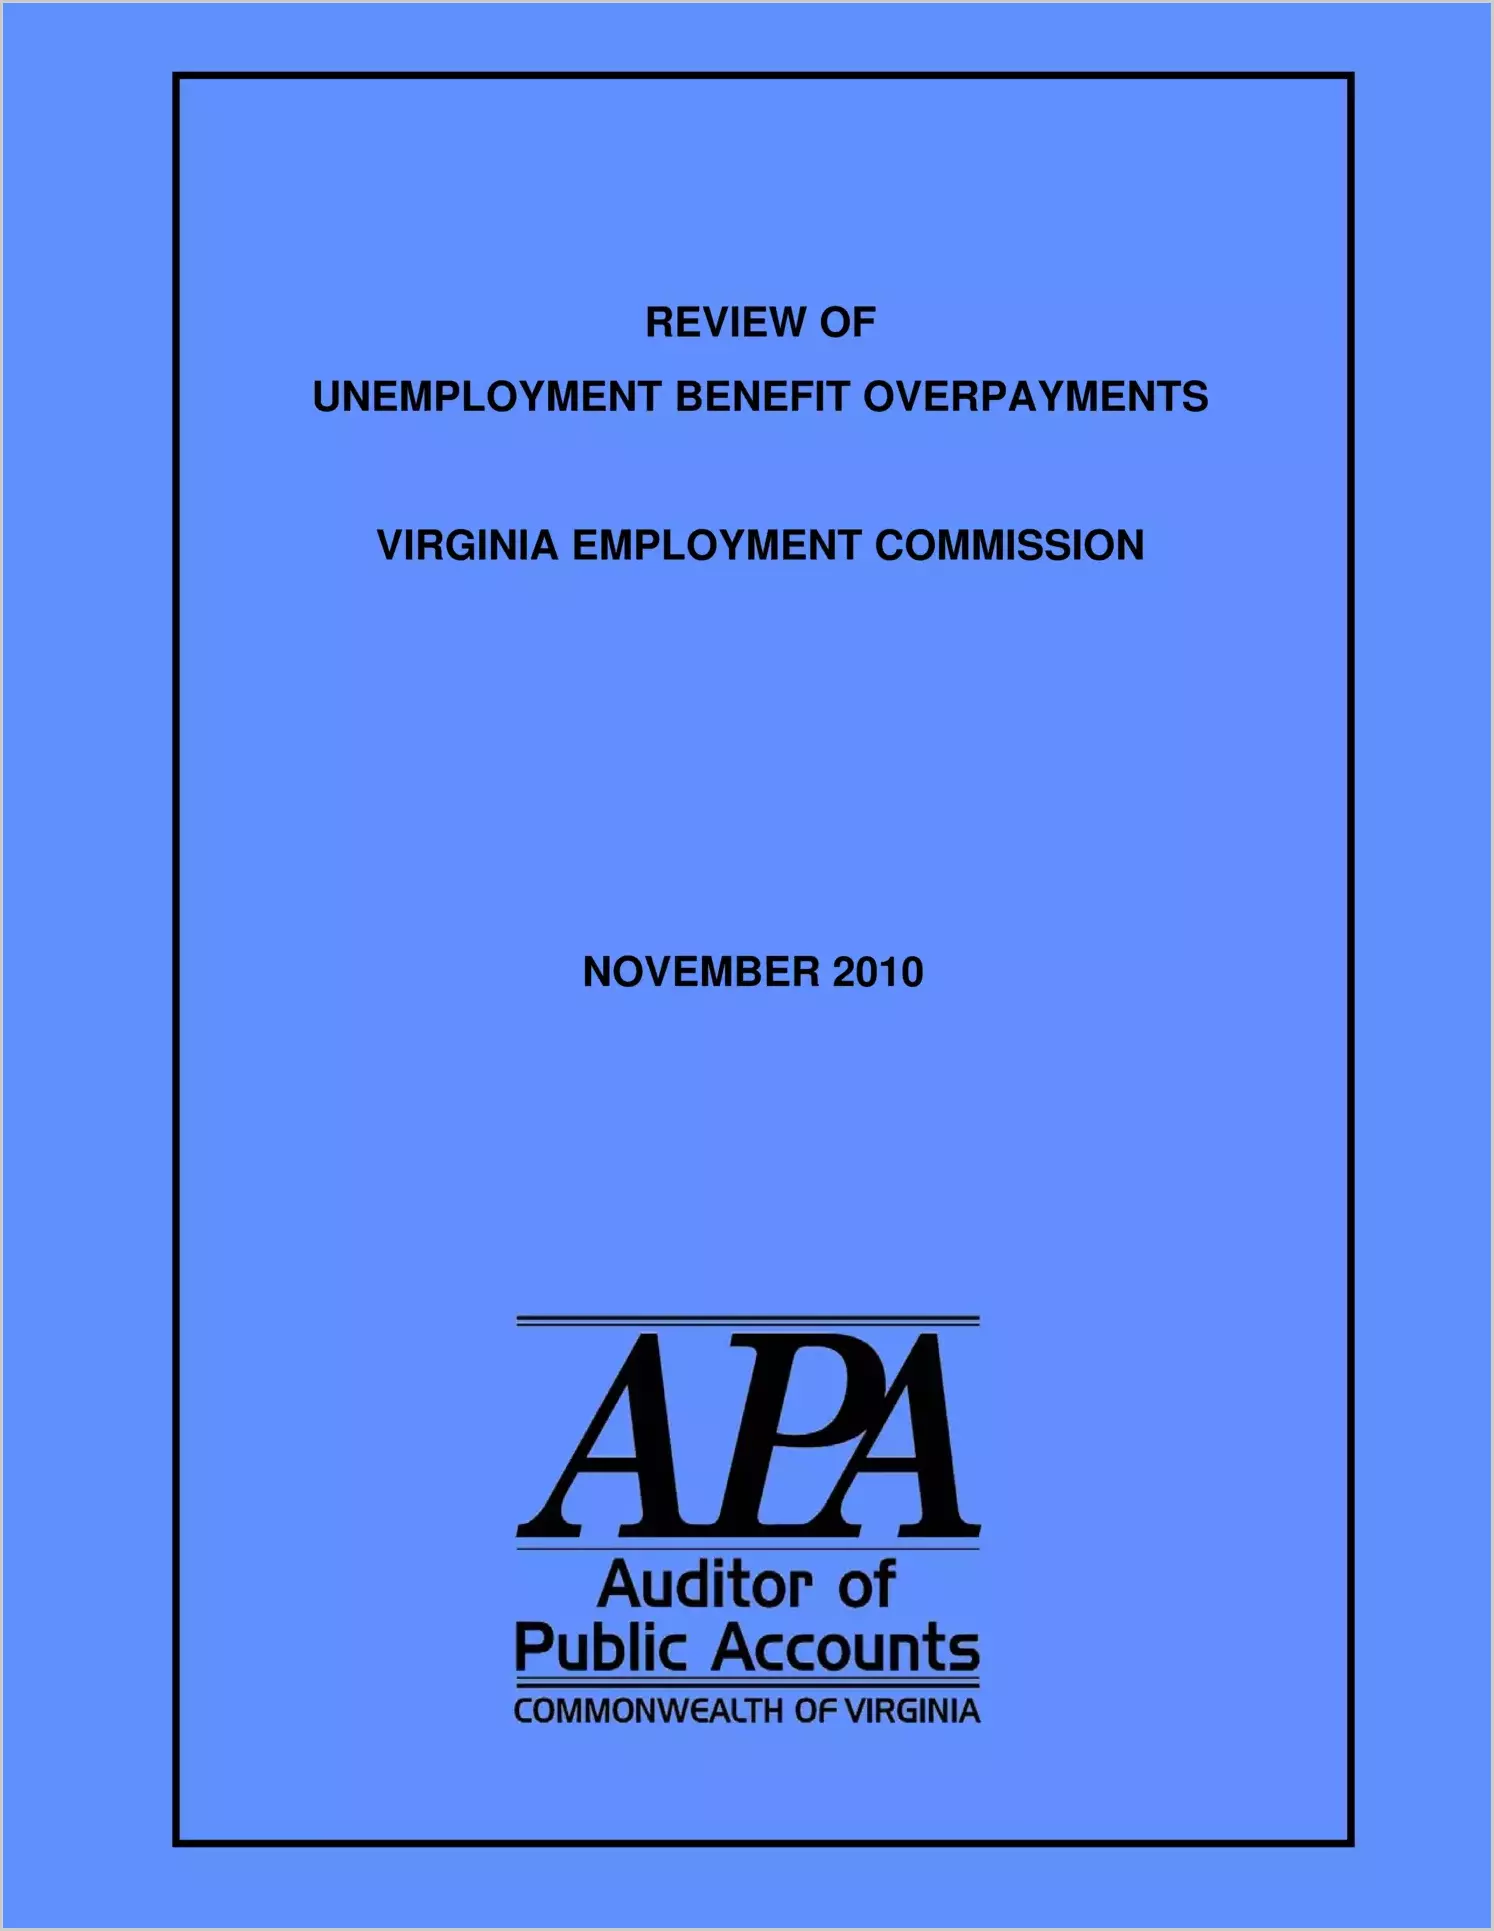 Review of Unemployment Benefit Overpayments Virginia Employment Commission as of November 2010